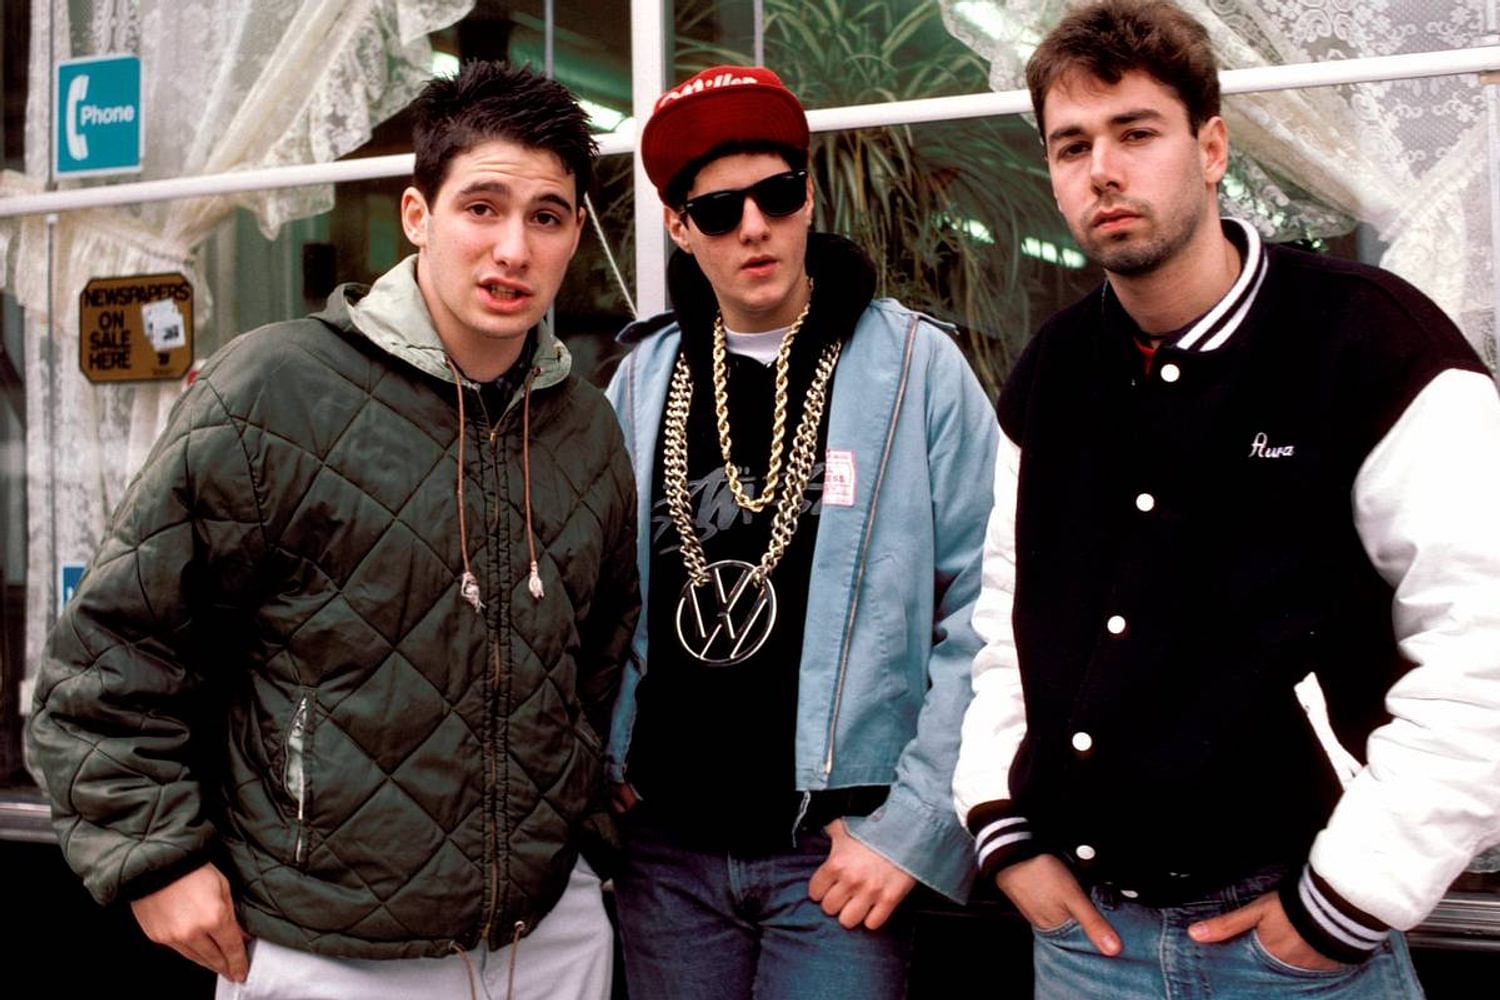 There’s going to be a Beastie Boys musical in London next month